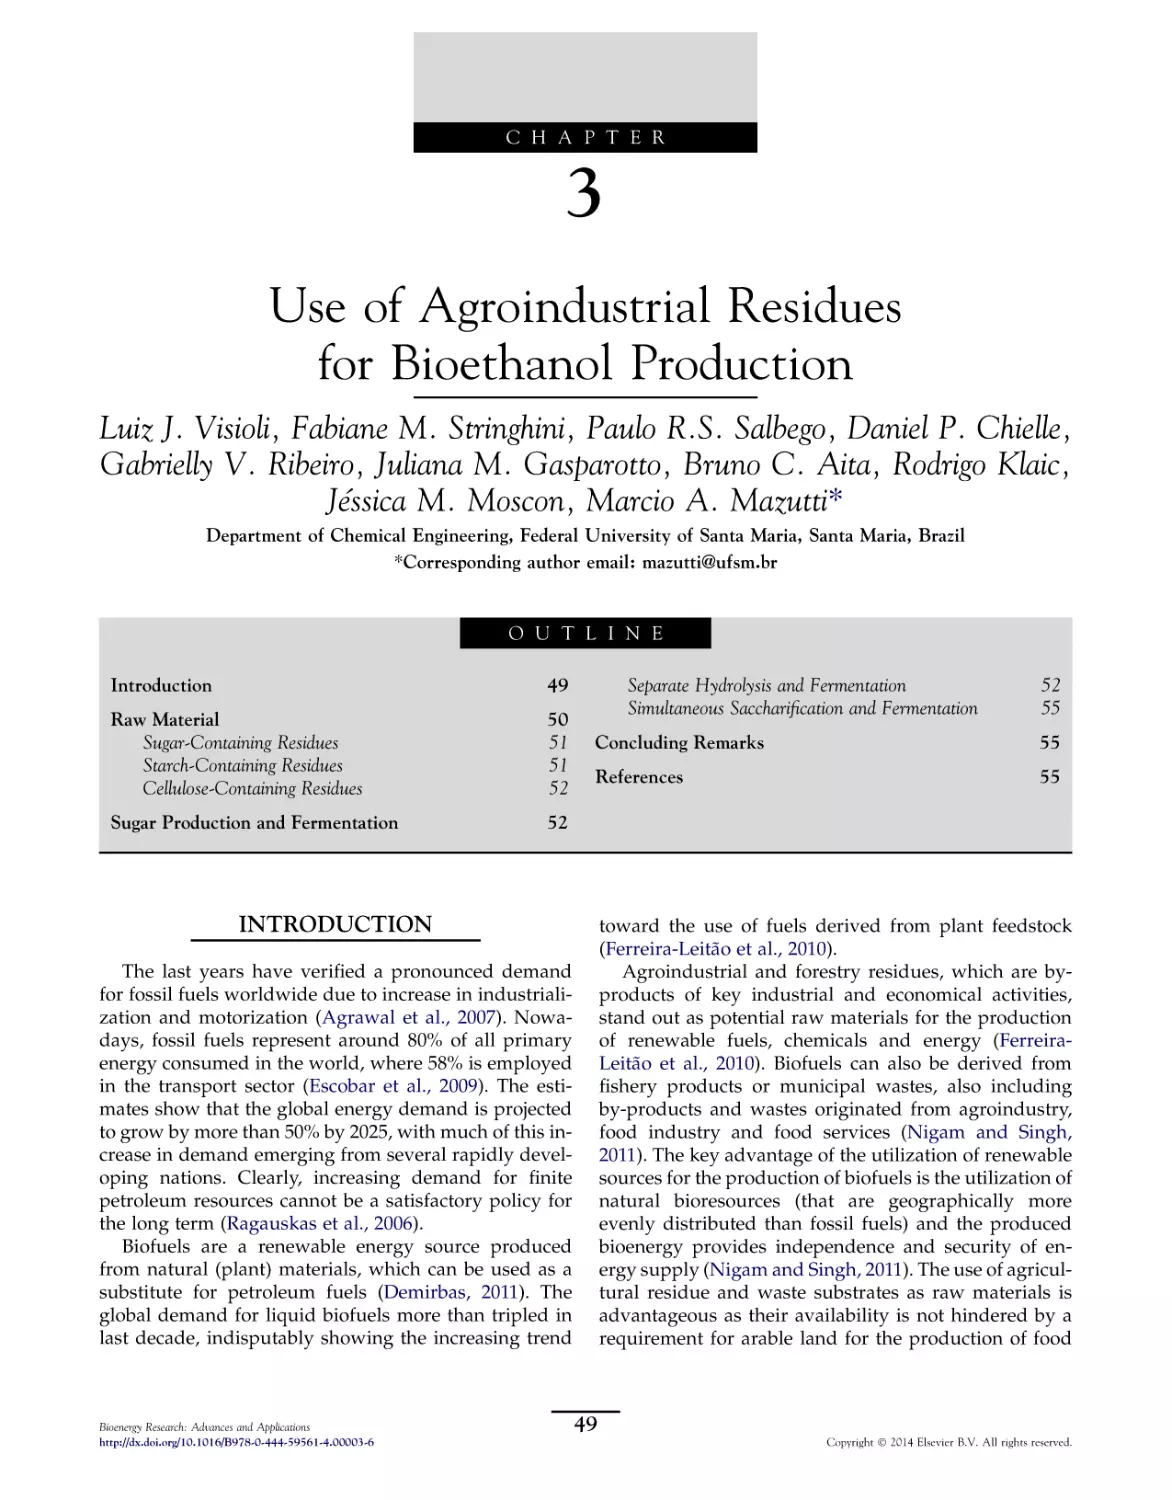 3. Use of Agroindustrial Residues for Bioethanol Production
Introduction